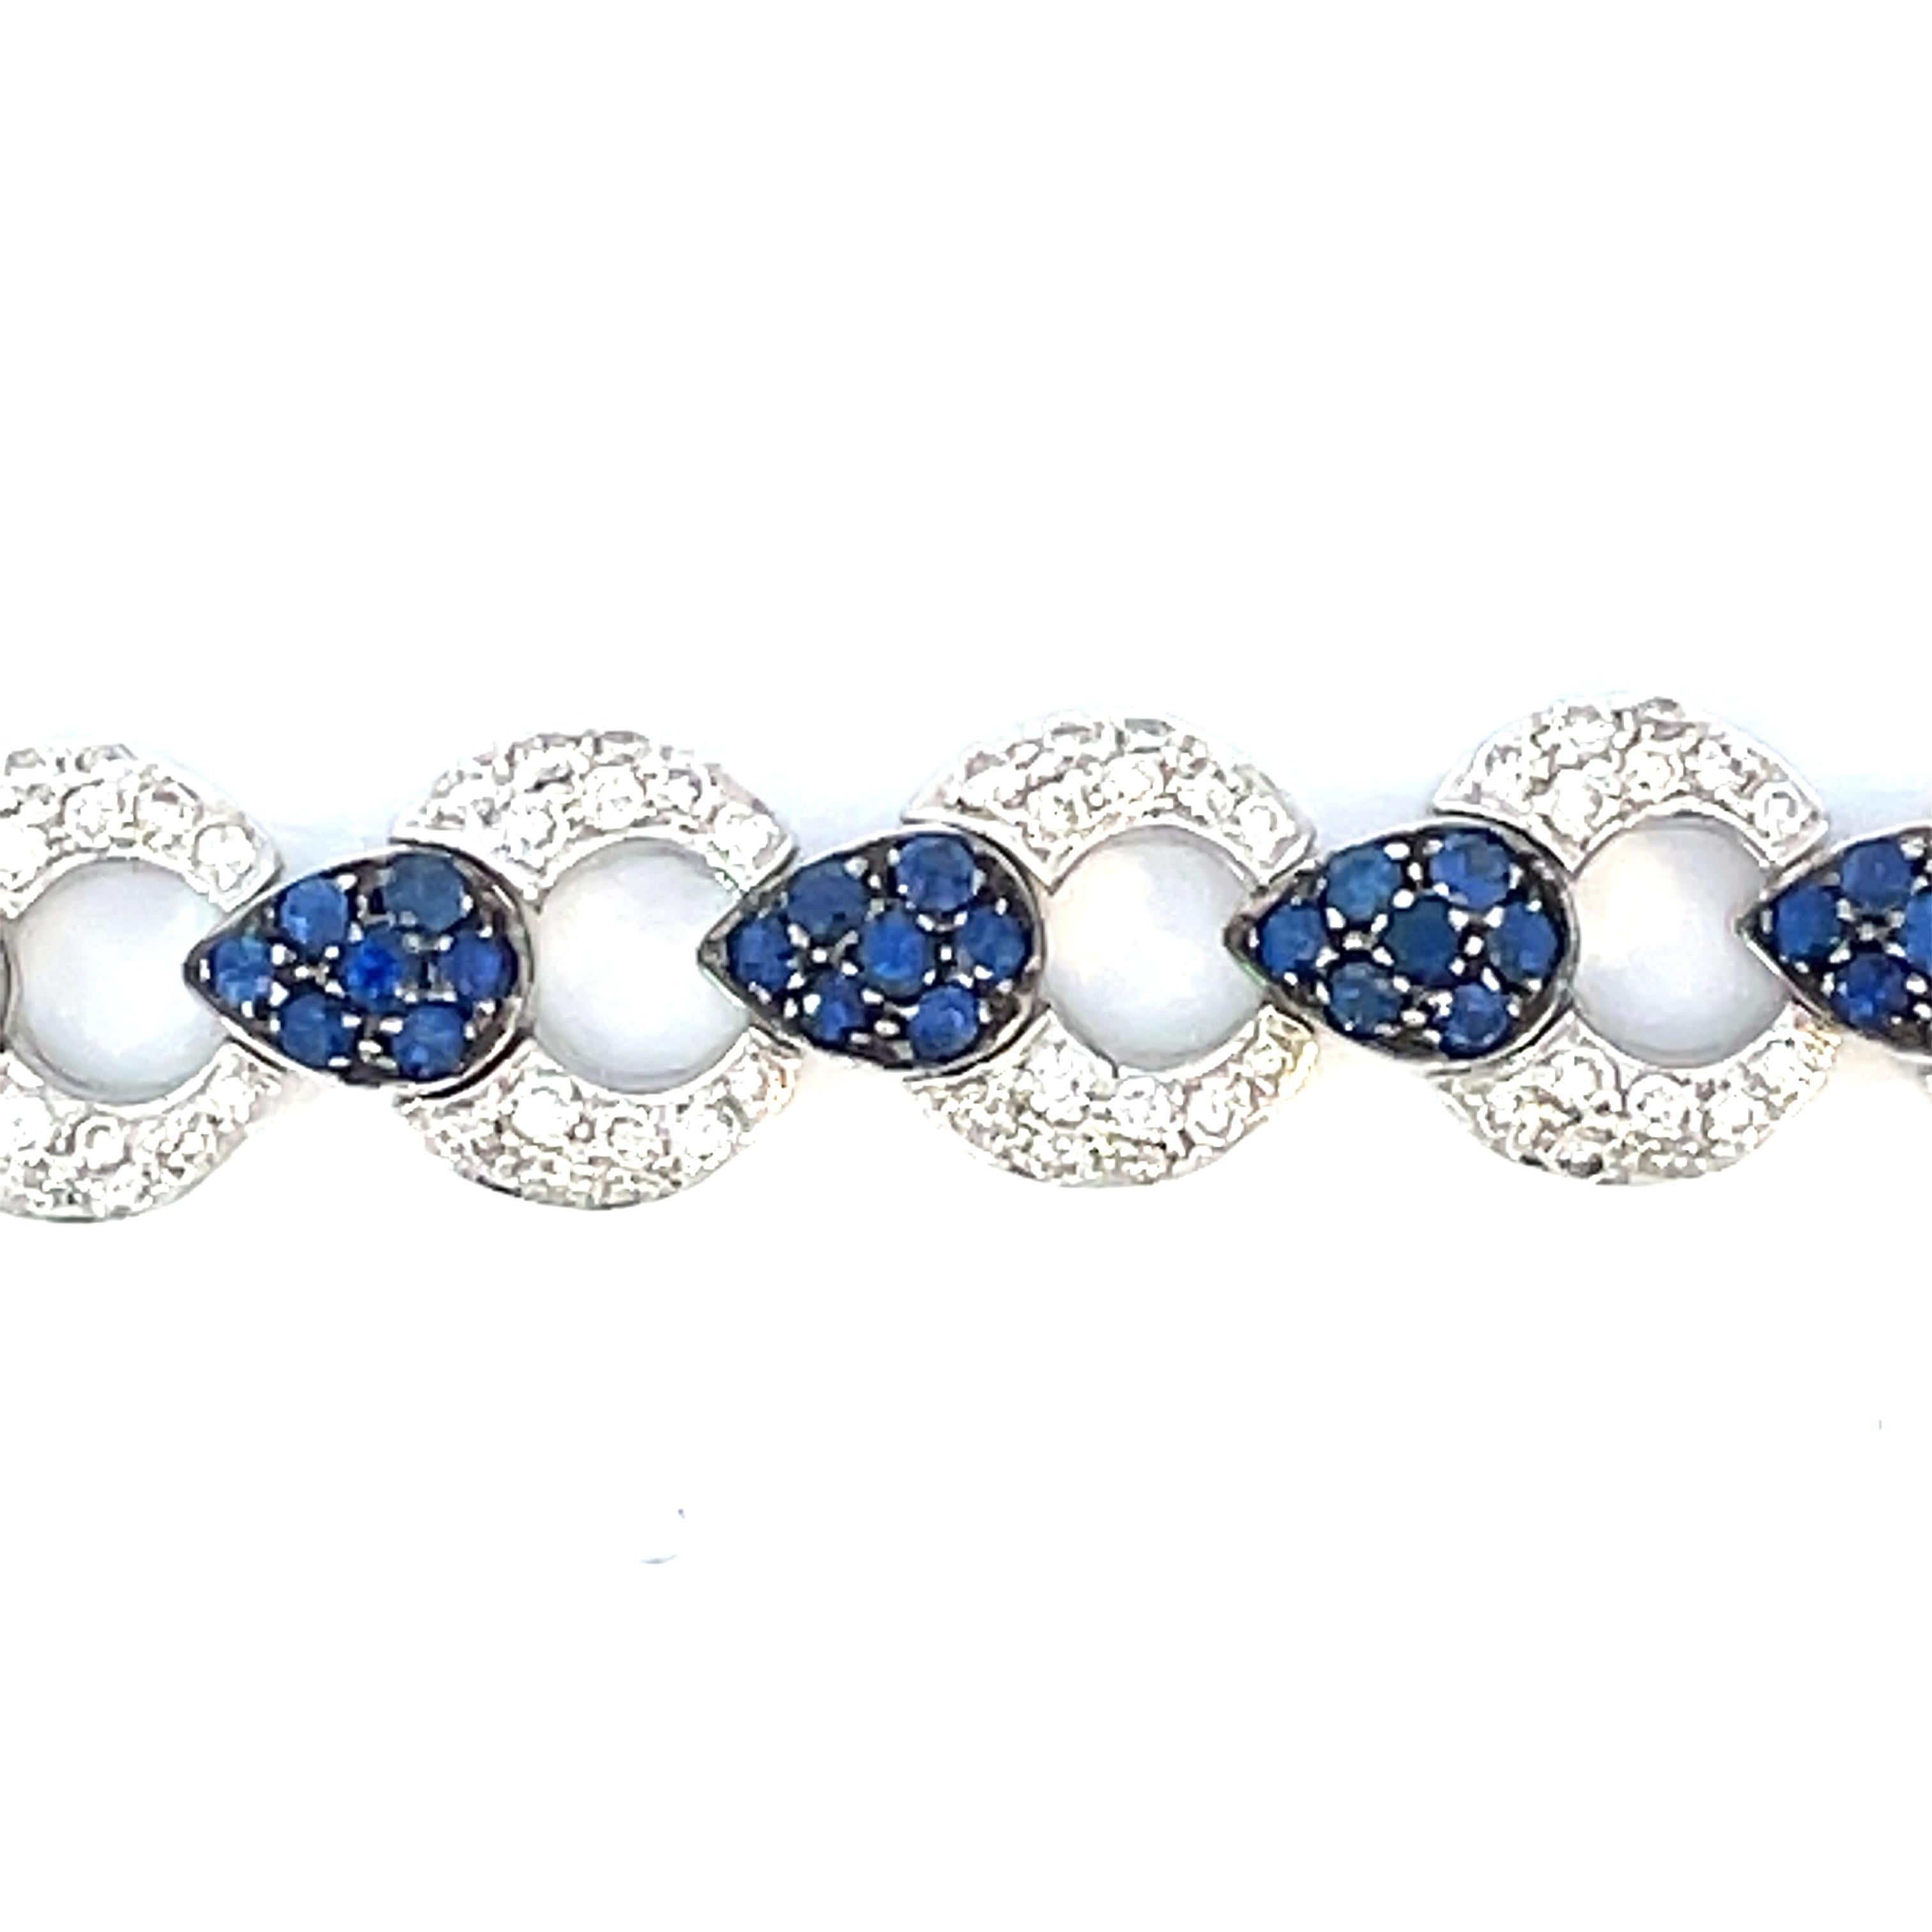 An elegant pave link bracelet with alternating pave natural white diamond and a black rhodium finish around the natural blue sapphire pear shaped stations in 18kt white gold.

112 natural blue sapphires weighing 3.32ct total weight

224 natural